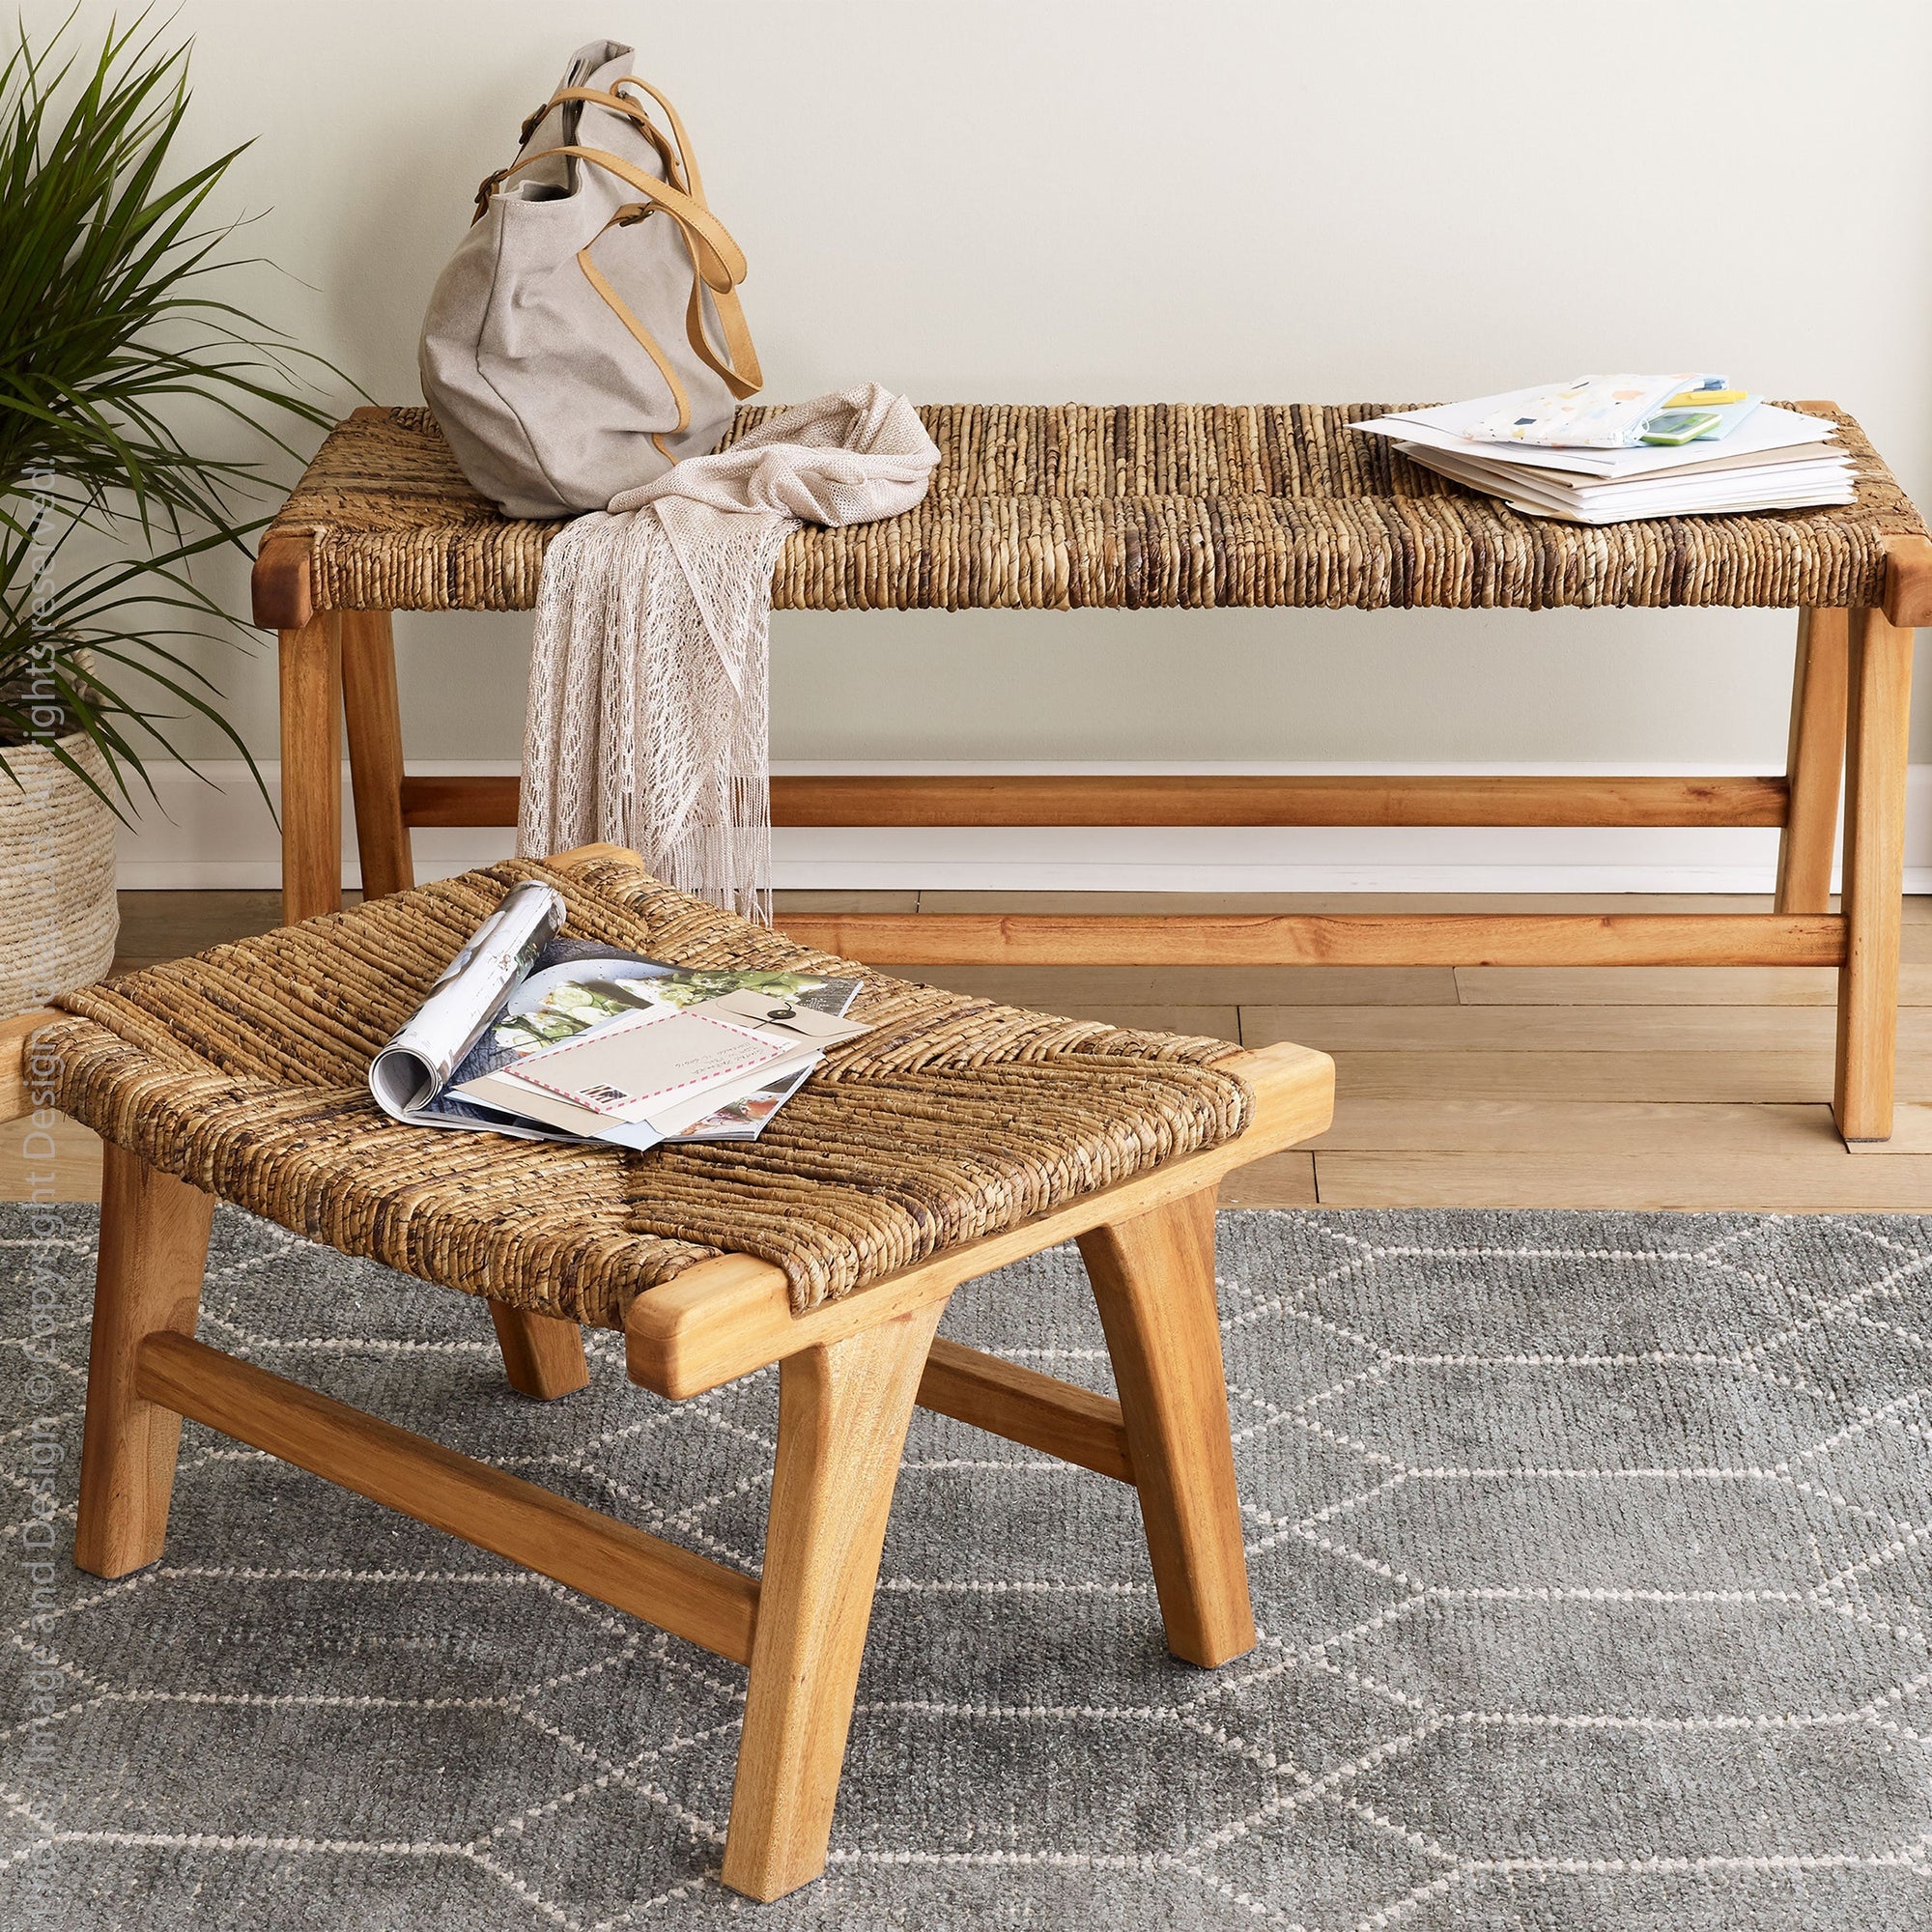 Copenhagen Banana Tree Bark Bench   | Image 3 | From the Copenhagen Collection | Masterfully crafted with natural banana tree bark for long lasting use | Available in natural color | texxture home